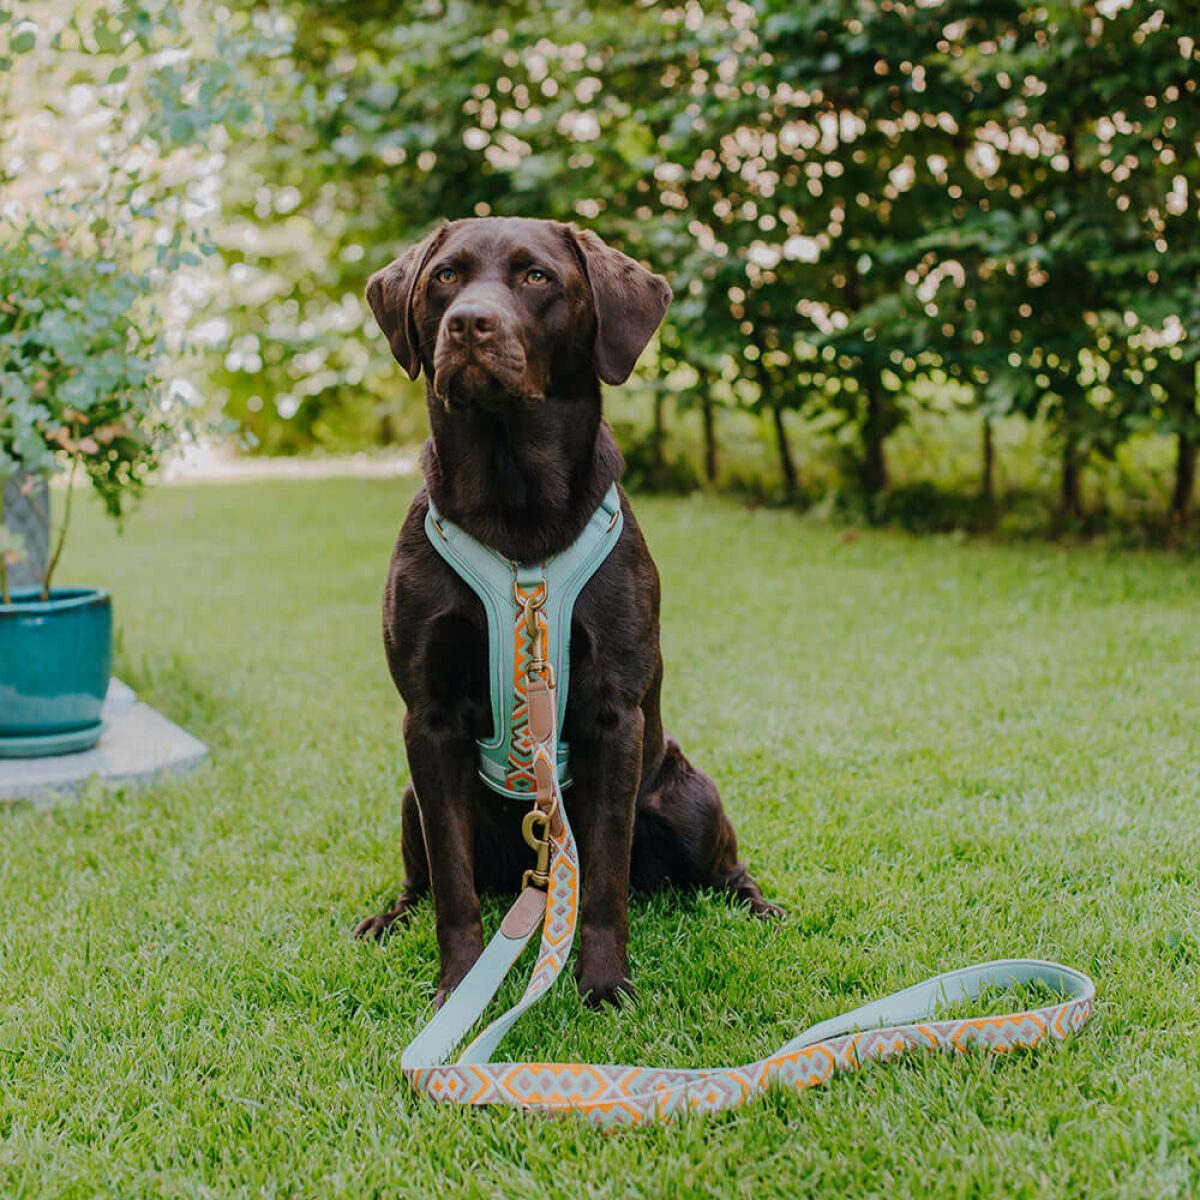 Dog with premium dog leather leash and harness is 3-way adjustable 2m in mint/orange